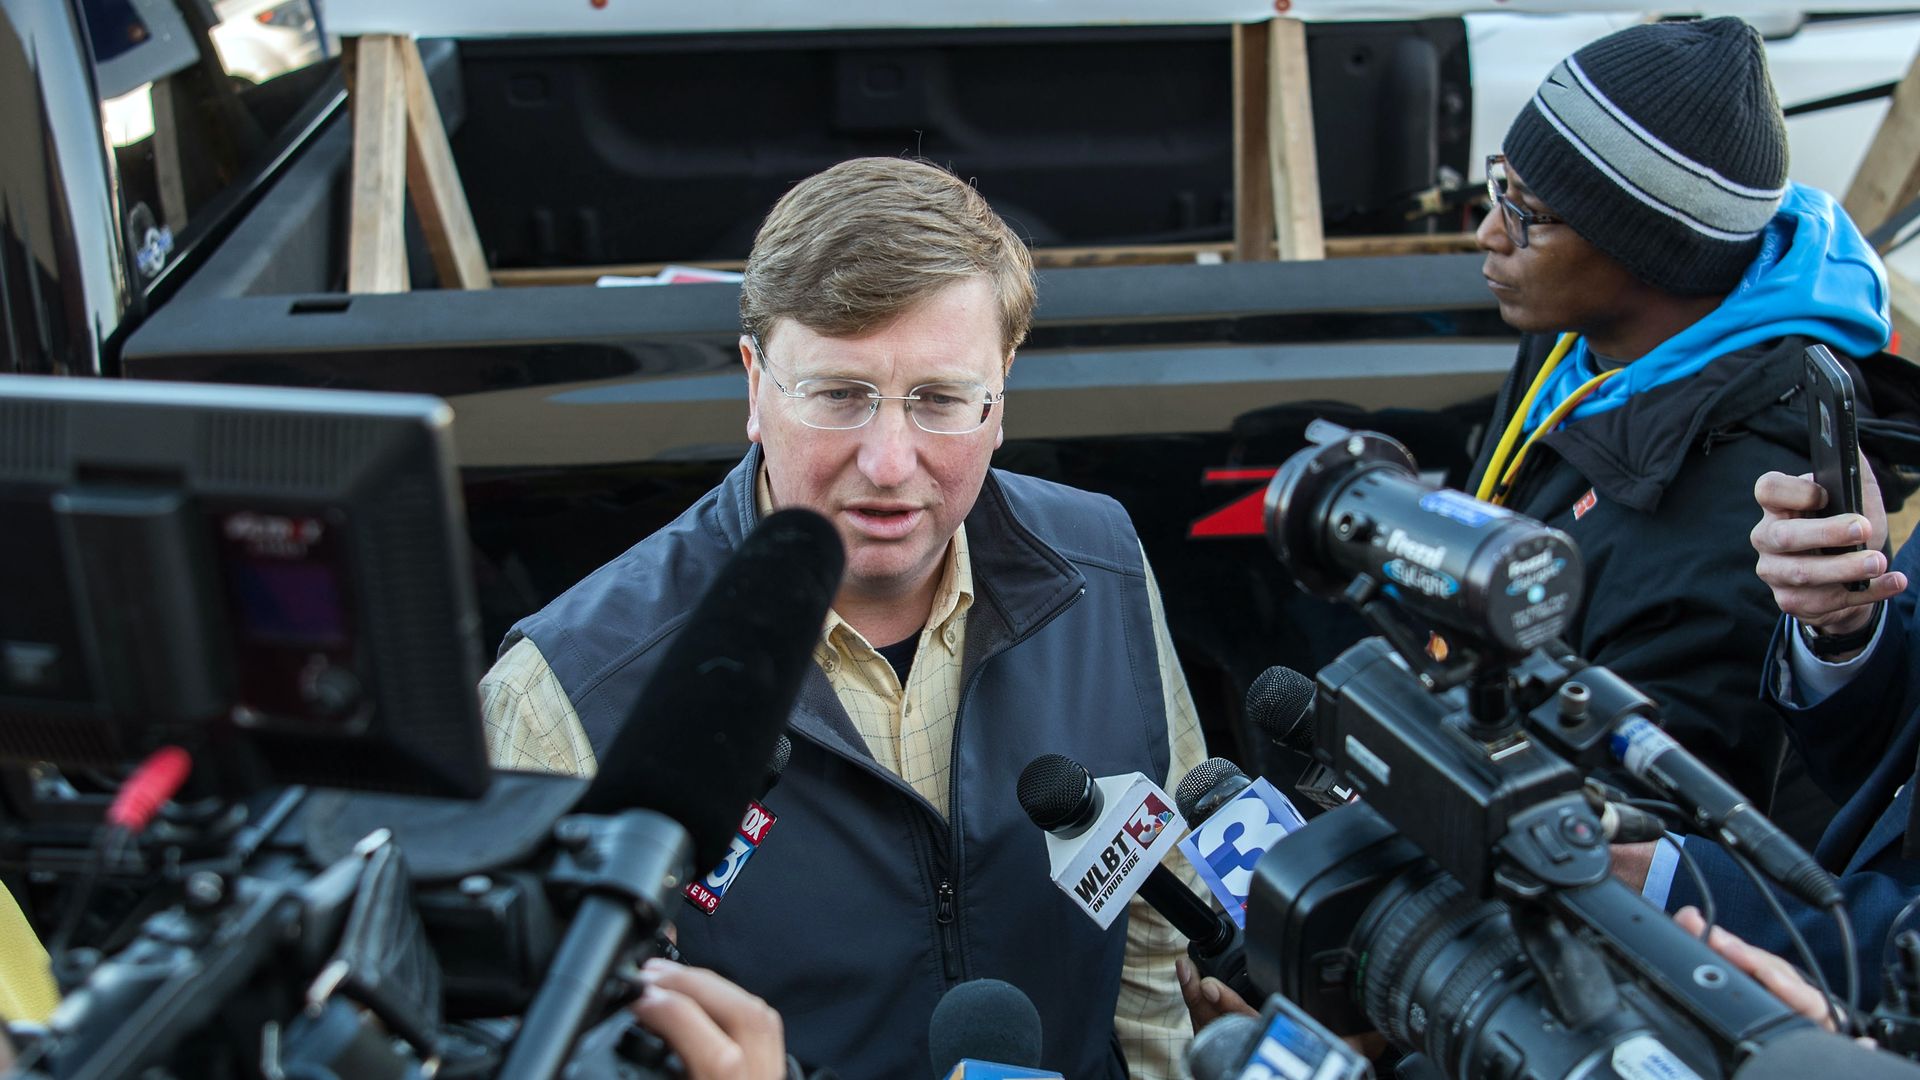 Tate Reeves speaks to the press prior to the President Trump rally in Tupelo, Mississippi on November 1